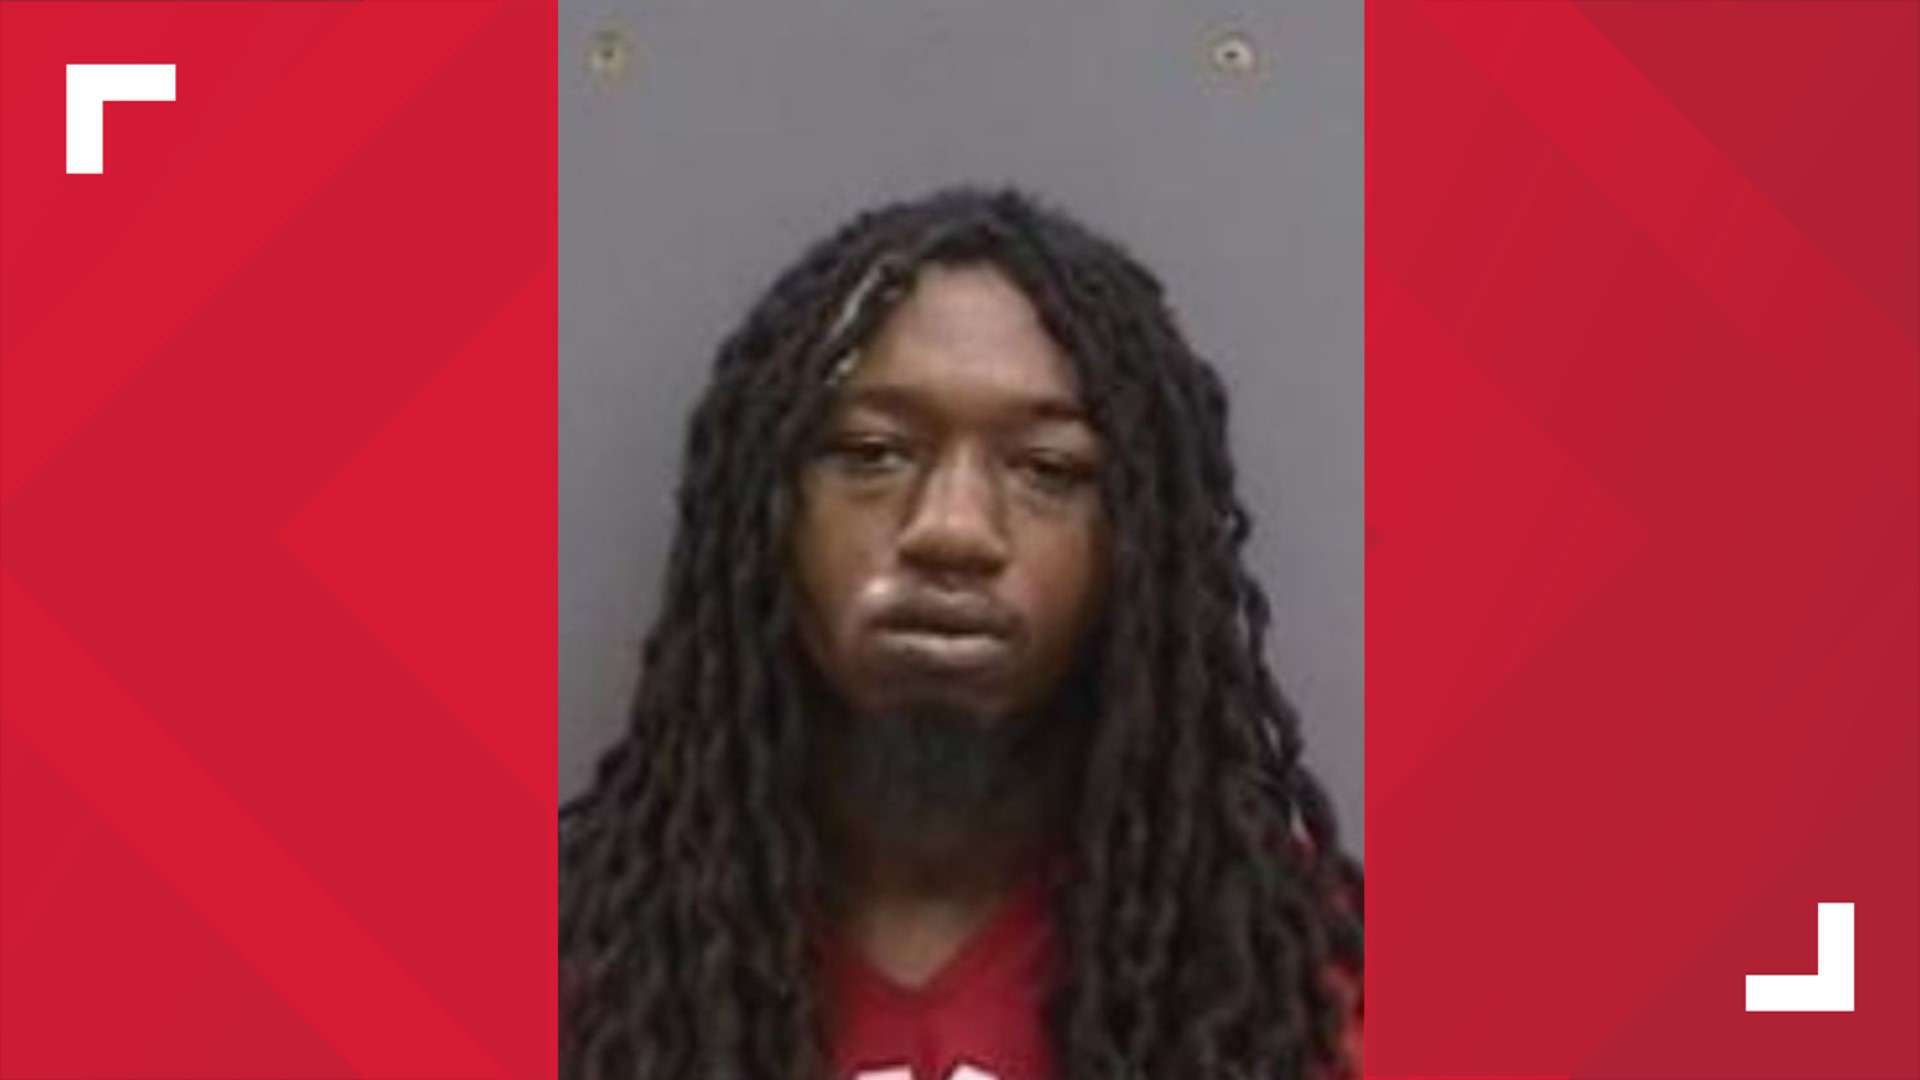 Gregory Hornsby is believed to have fatally shot a man after a fight near the Advance Auto Parts on Highview Road and East Dr. Martin Luther King Boulevard.